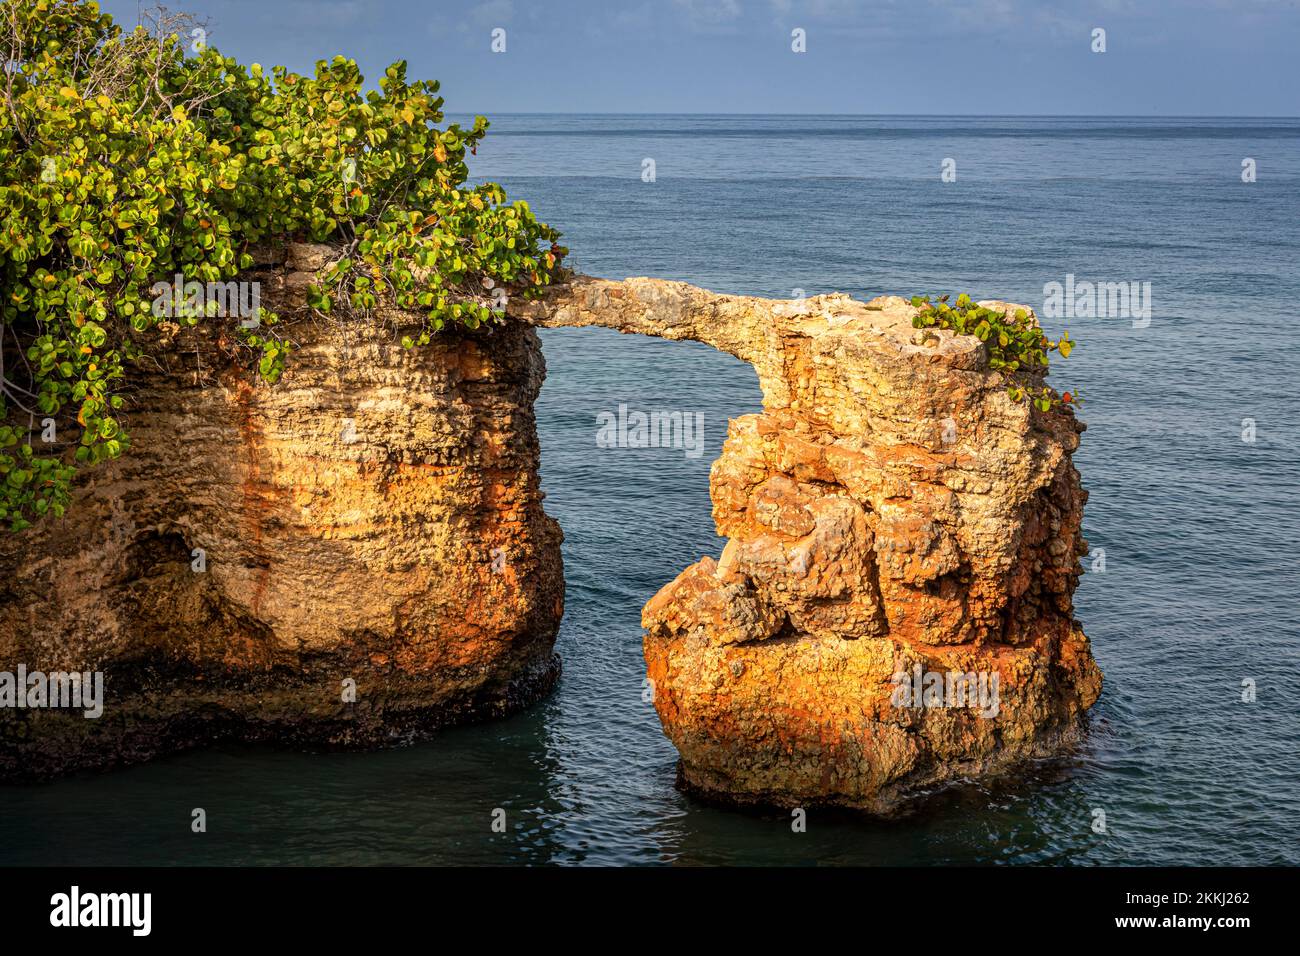 Rock Bridge on the tip of Cabo Rojo, on the tropical Caribbean island of Puerto Rico, USA. Stock Photo